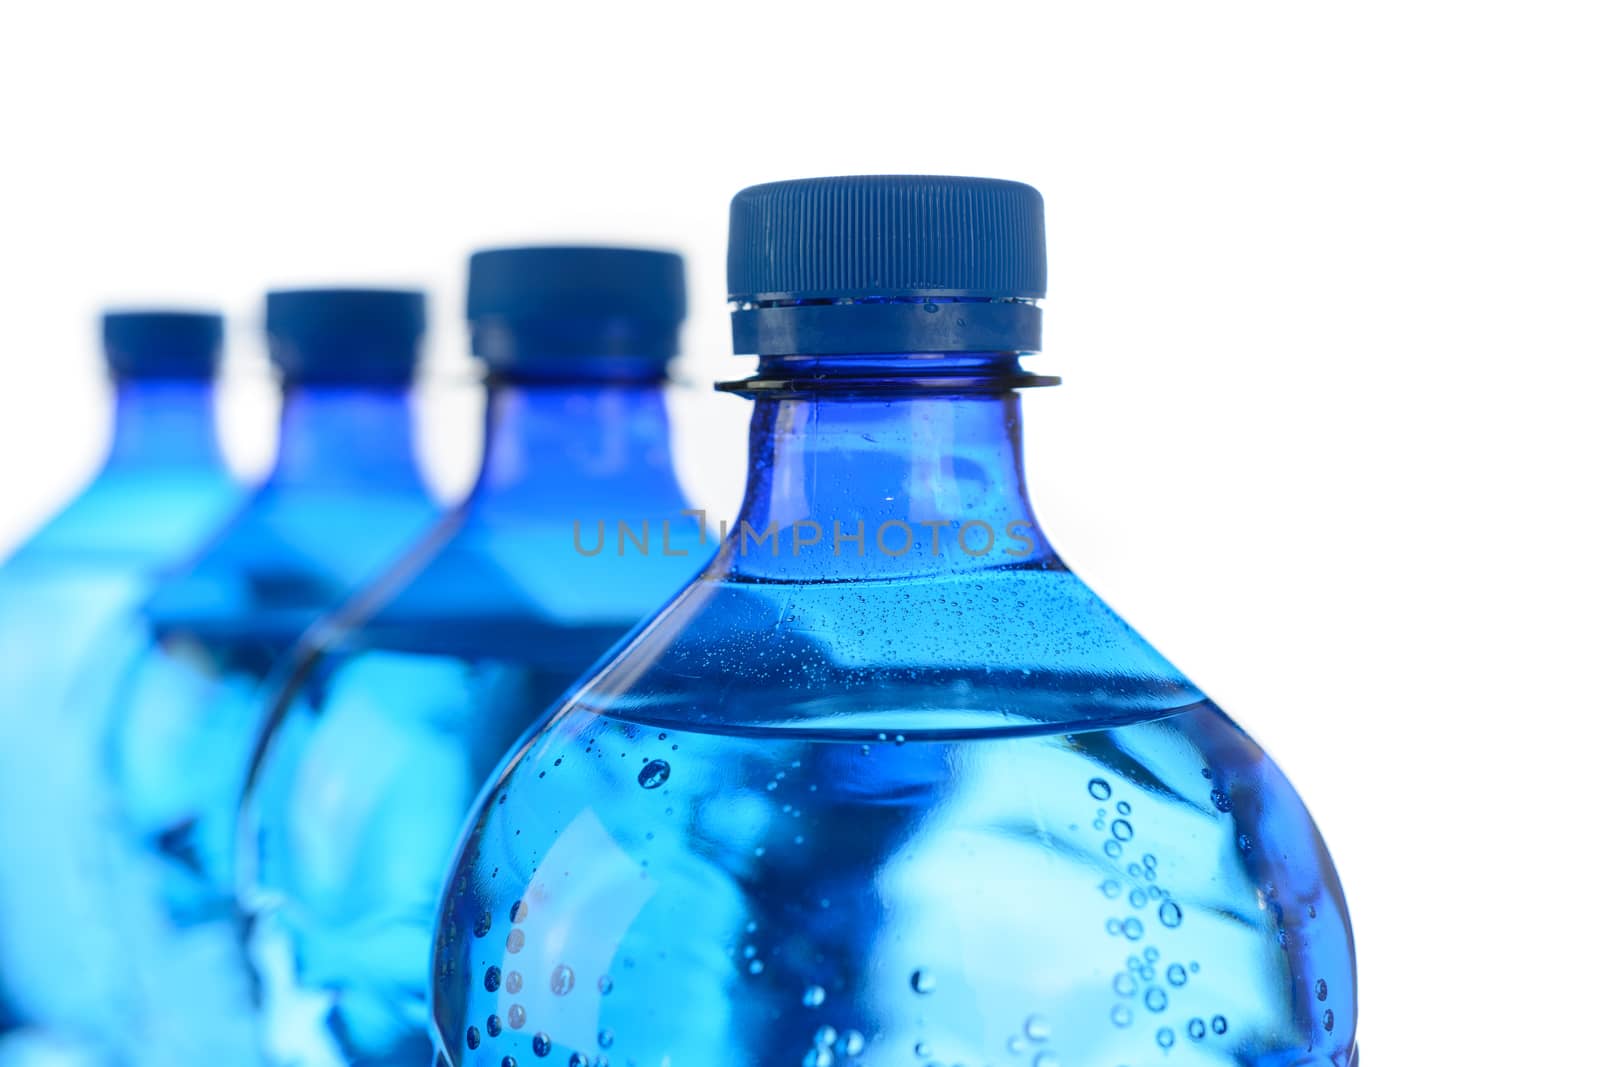 Fresh mineral water concept - cool bottles of mineral water in a row on a white background in close-up.